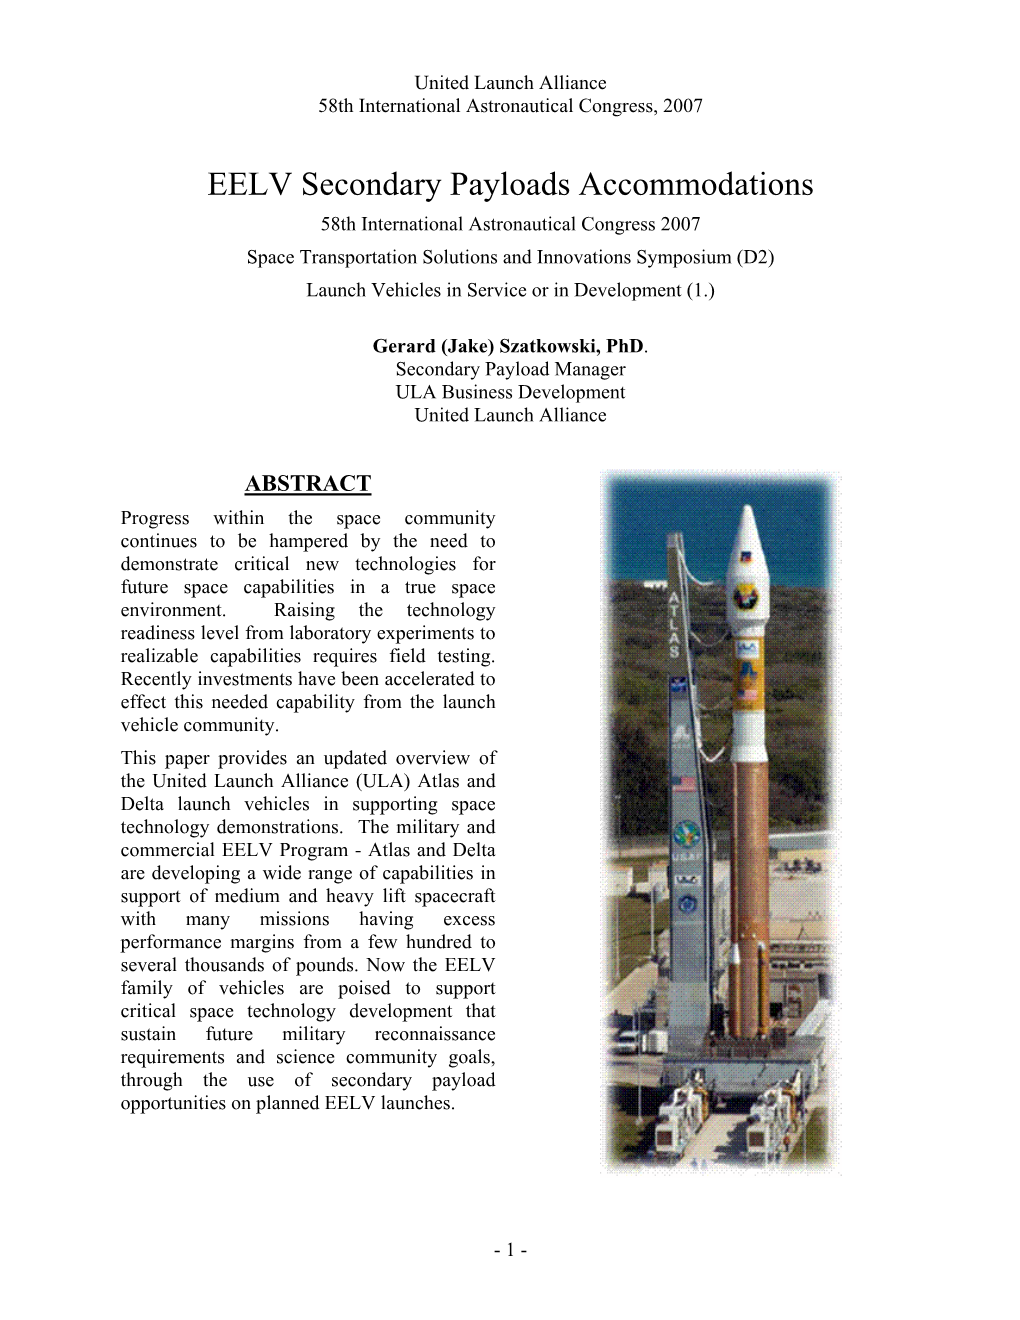 EELV Secondary Payloads Accommodations